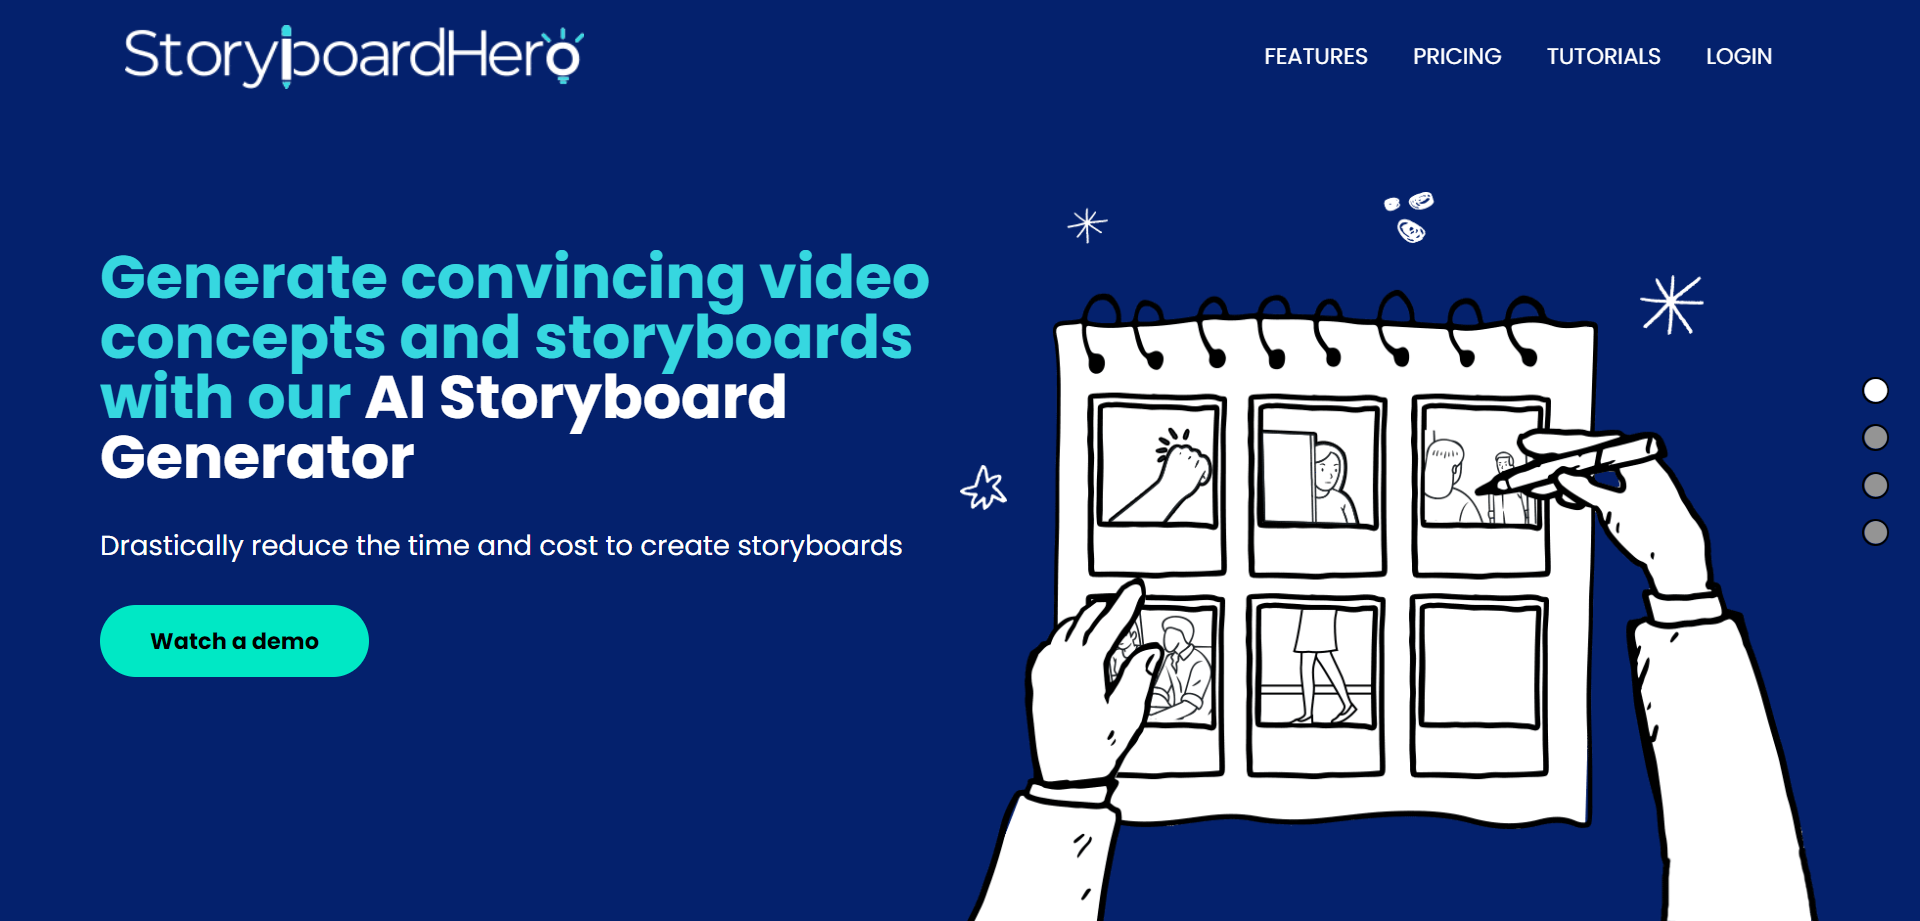 Storyboard HeroThis tool enables the rapid and affordable creation of